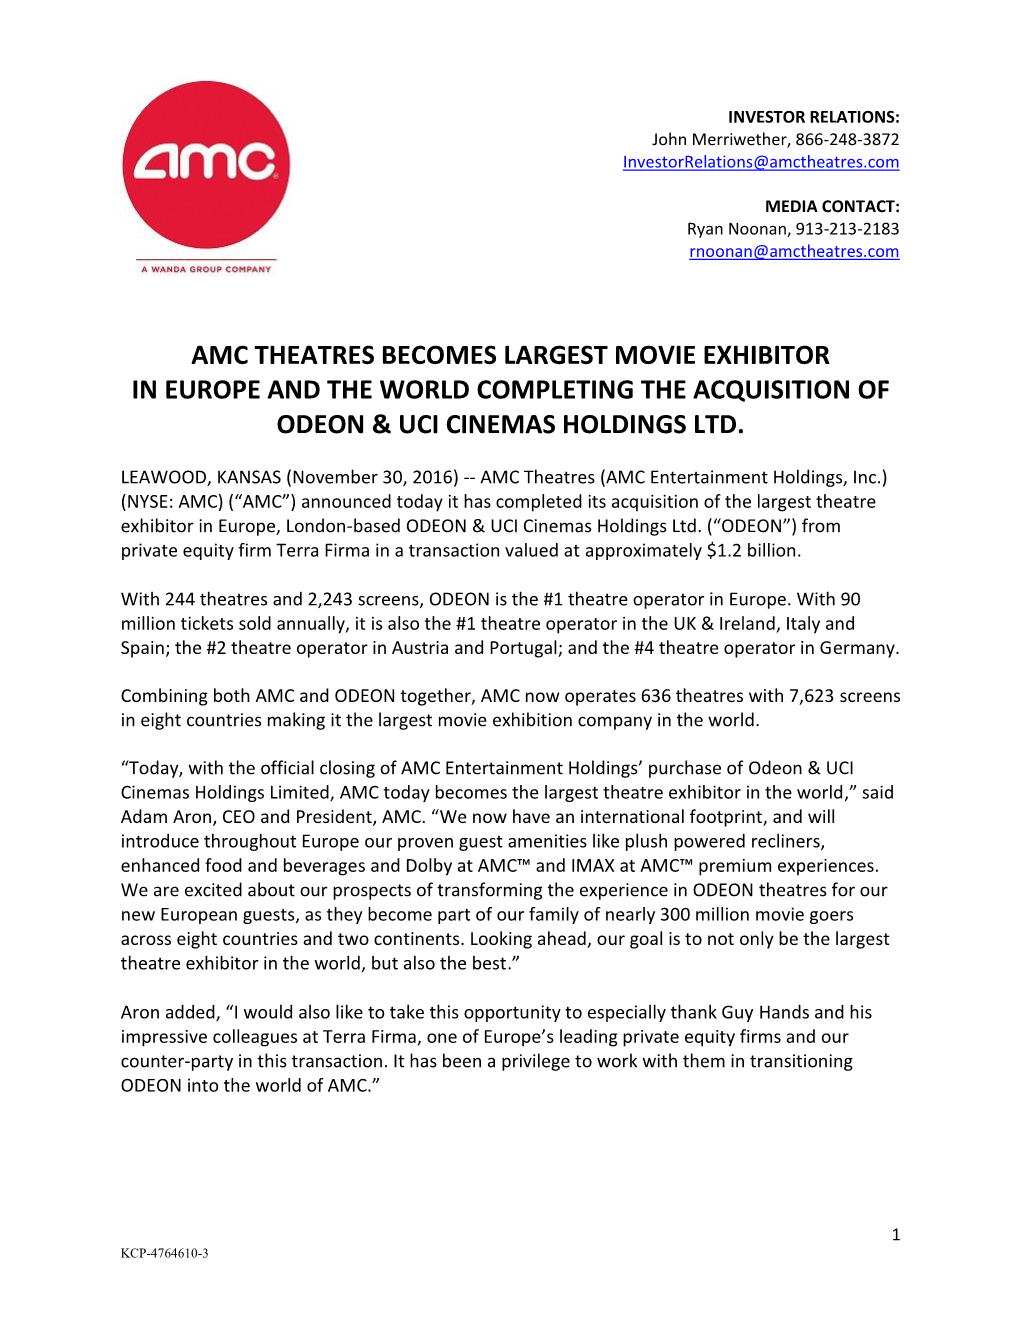 Amc Theatres Becomes Largest Movie Exhibitor in Europe and the World Completing the Acquisition of Odeon & Uci Cinemas Holdings Ltd